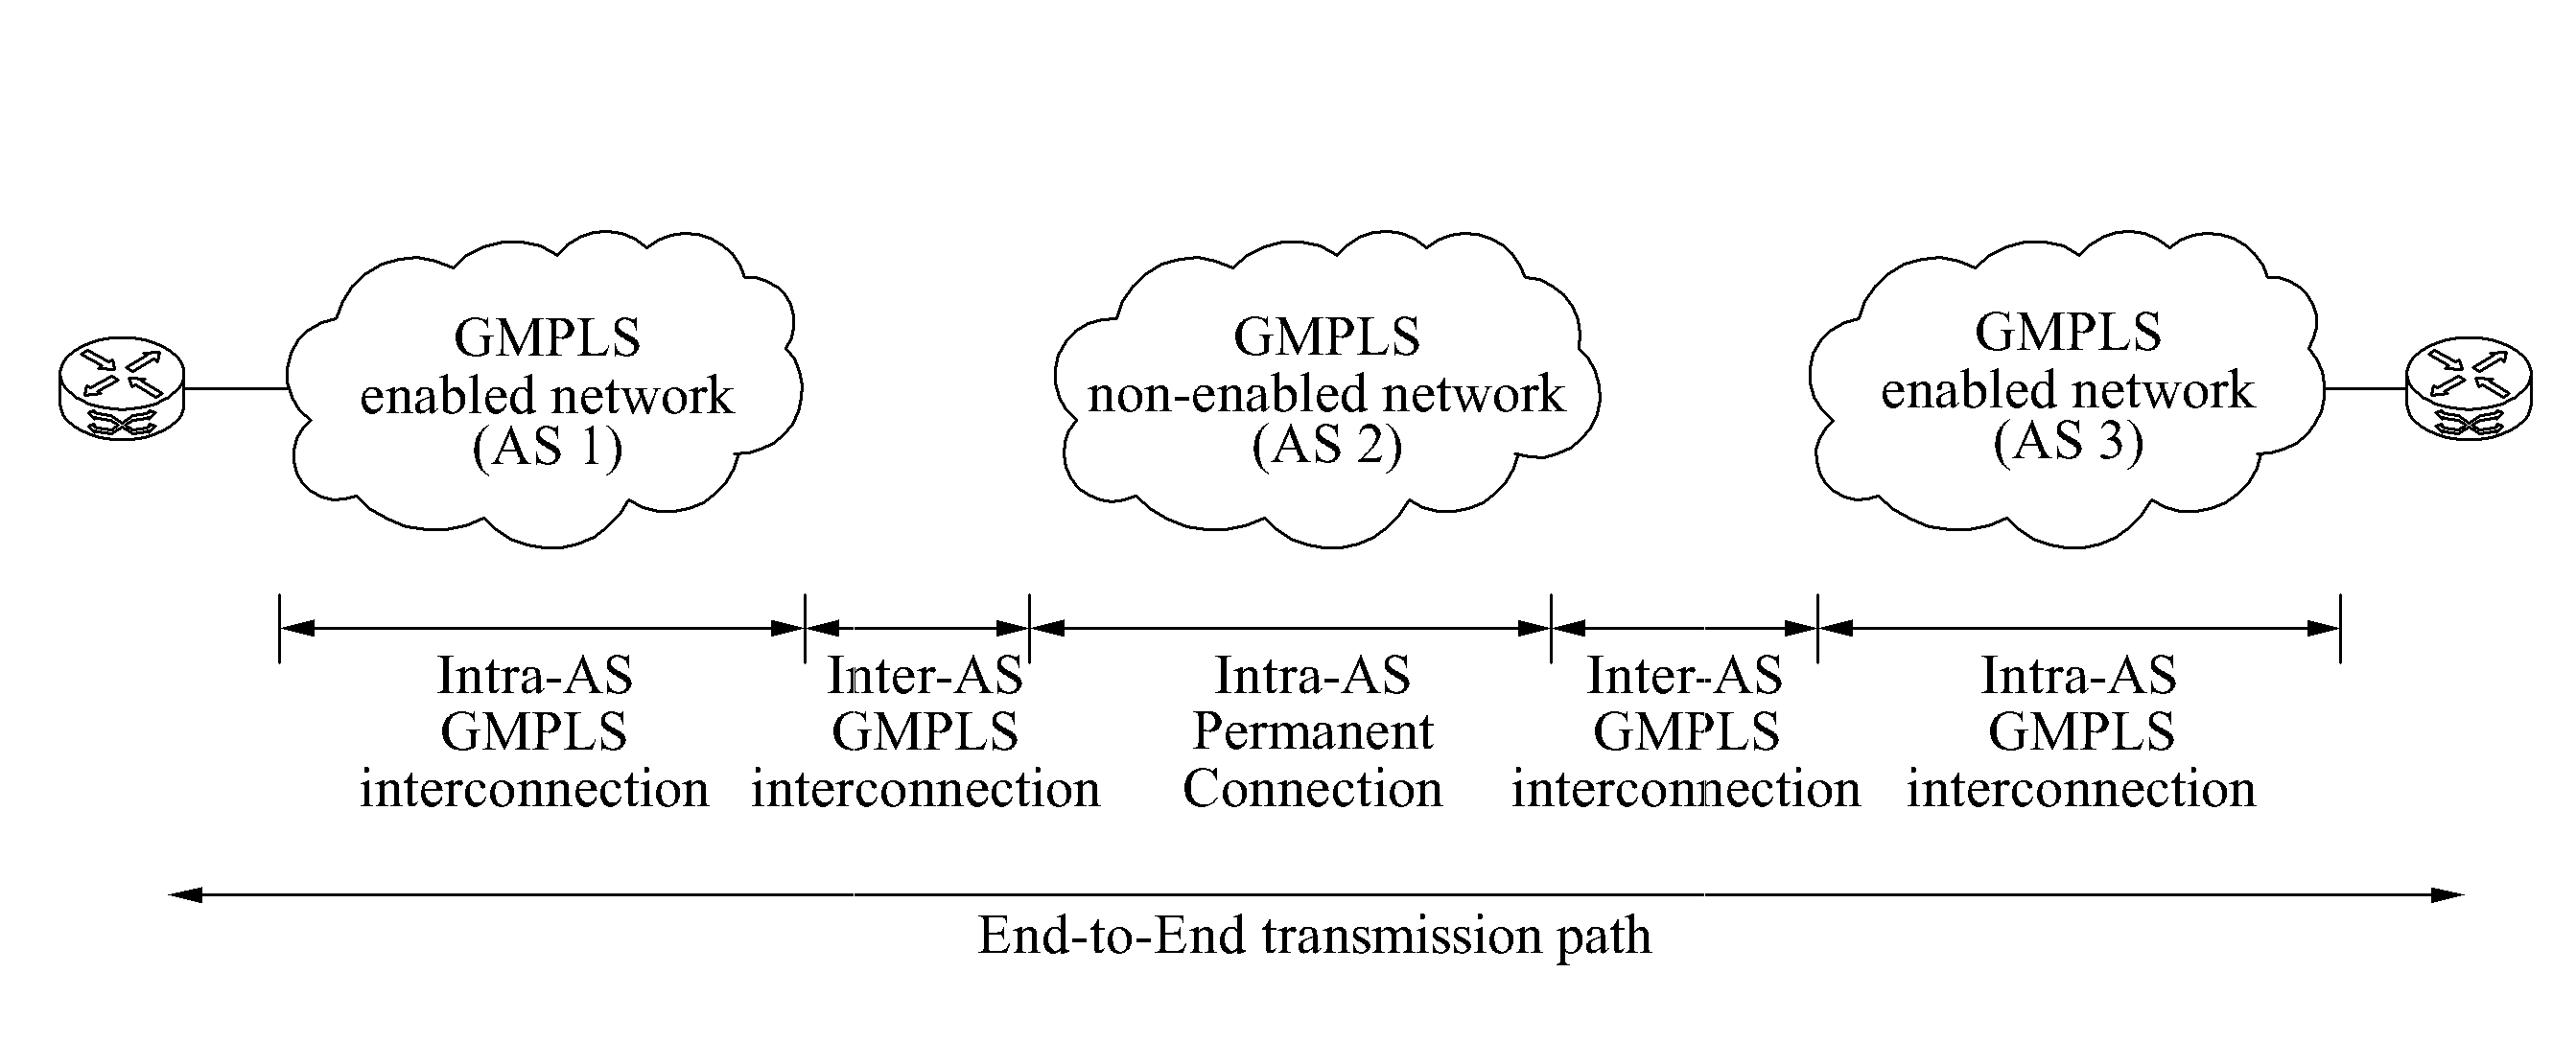 Gmpls non-enabled network gateway and operating method for routing between gmpls enabled network and gmpls non-enabled network